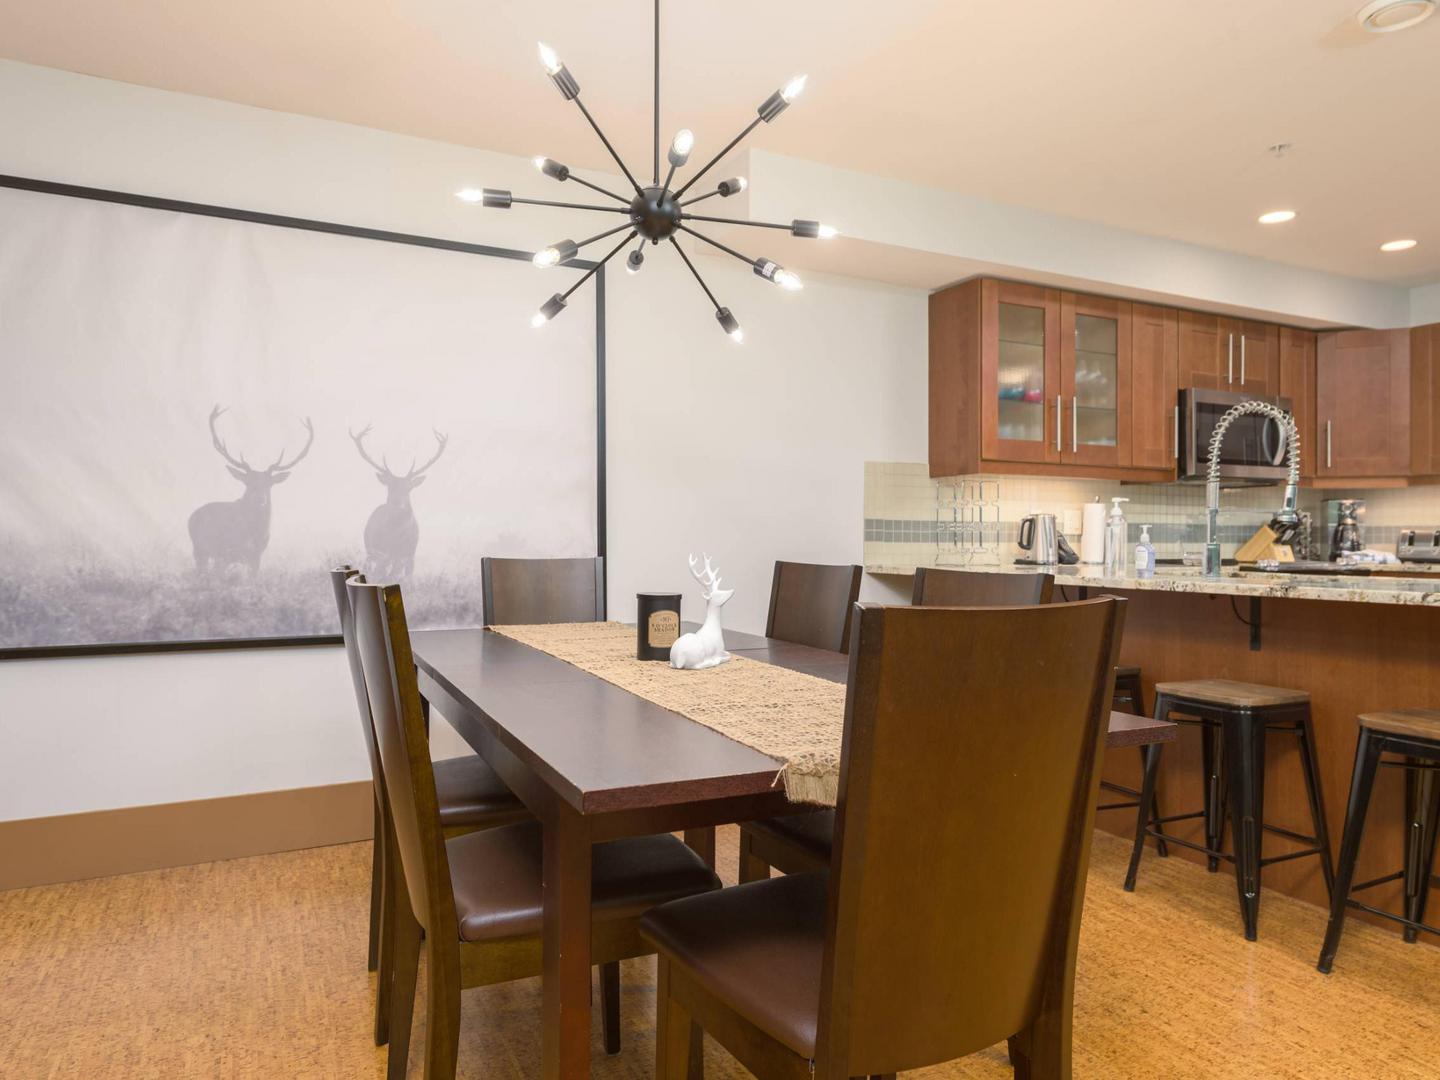 Raven 304's open concept dining space with the gourmet kitchen in the background, a large wooden table and a modern chandelier above, managed by Luxury Mountain Vacation Rentals at Big White Ski Resort